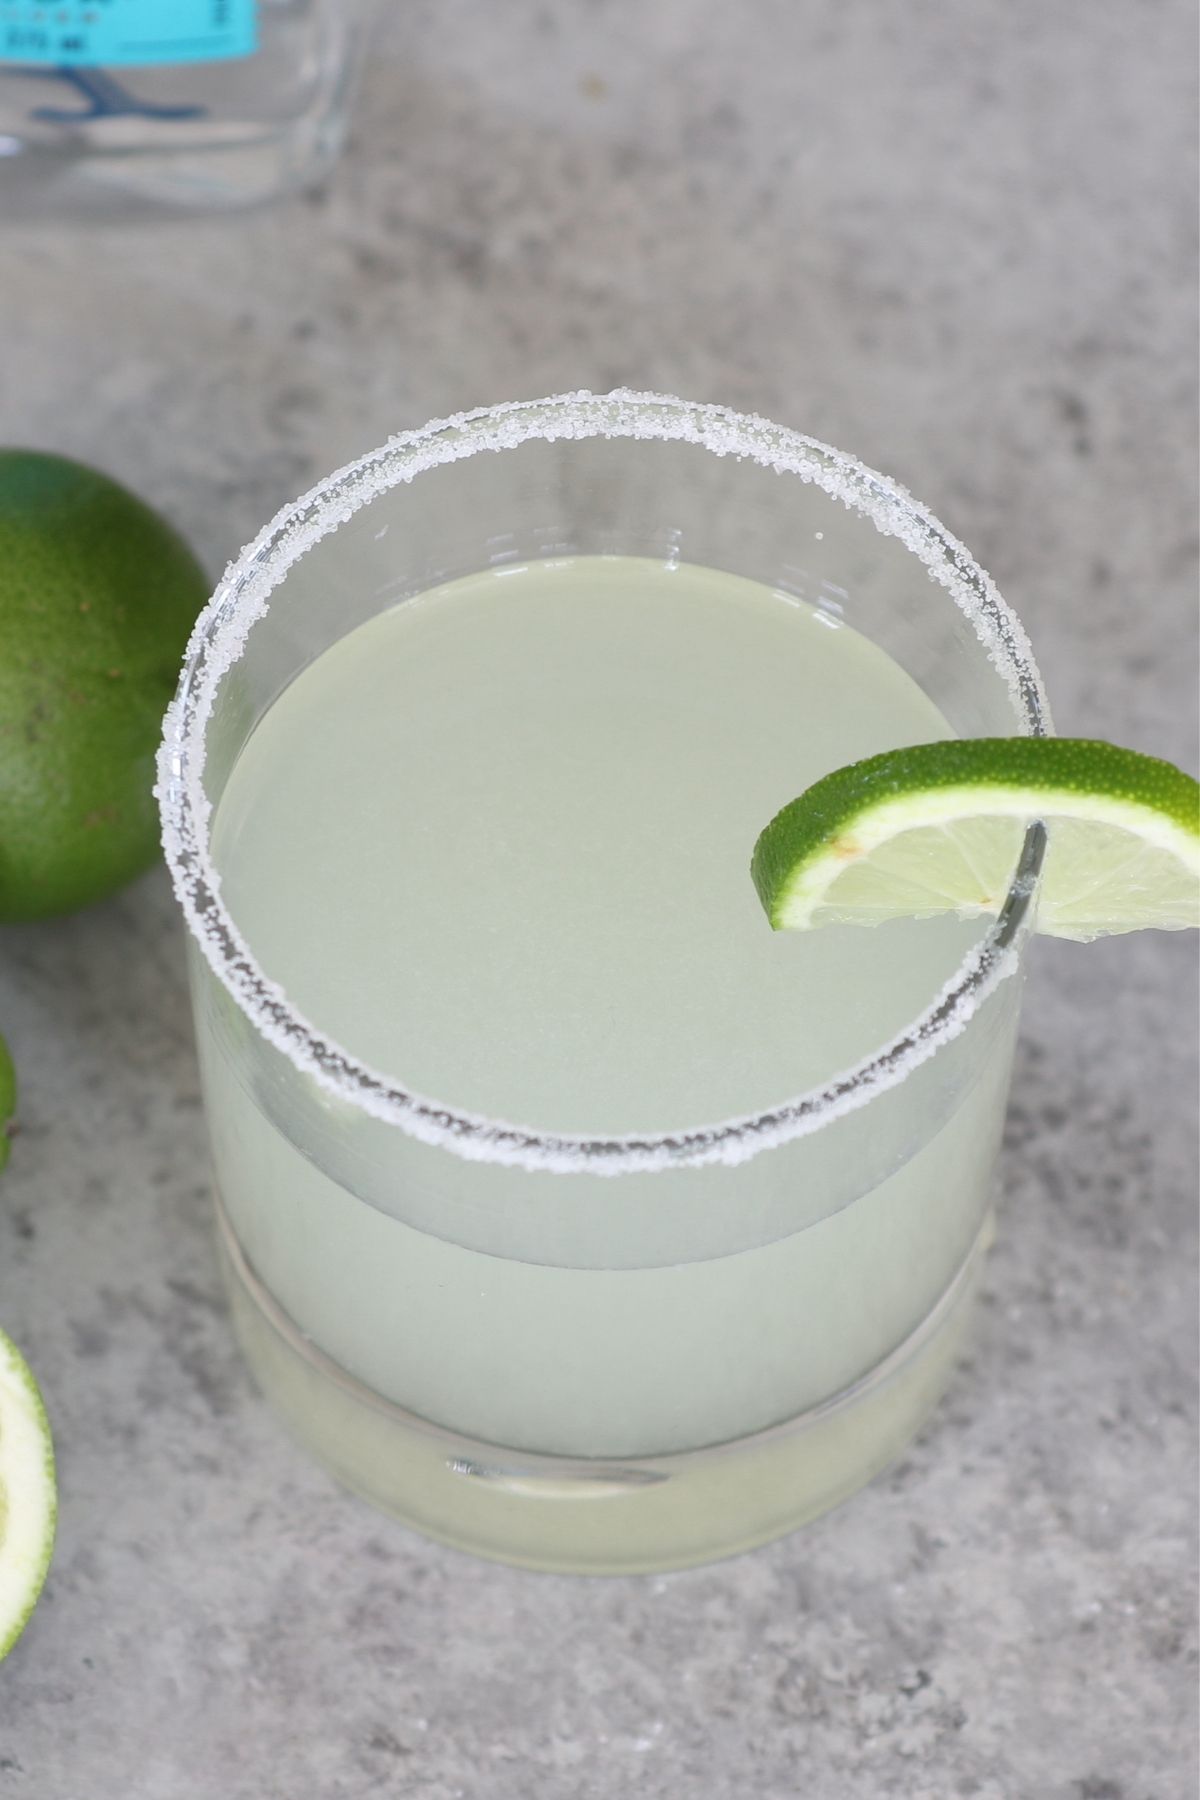 This Margarita on the Rocks combines sweet, sour and salty into one delicious cocktail you’ll want to enjoy again and again! They’re undeniably refreshing and set the mood for summertime parties, Cinco de Mayo and backyard cookouts. Best of all, there’s no need to head to a bar or a Mexican restaurant to get a taste!